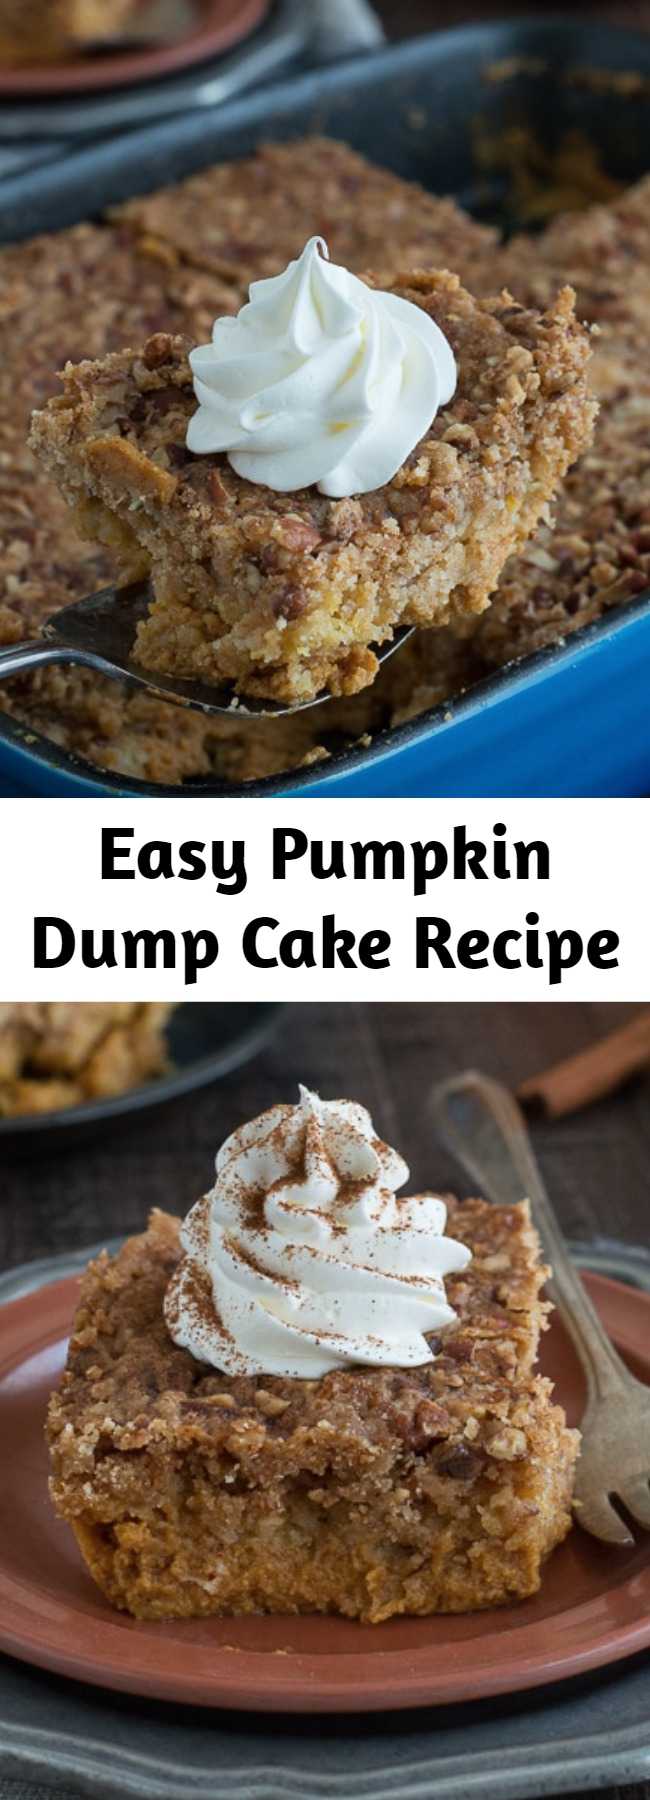 Easy Pumpkin Dump Cake Recipe - Use canned pumpkin and a box of yellow cake mix to make 8 ingredient pumpkin dump cake! Just mix, dump, and bake - it’s ready in under 1 hour! This will be a family favorite pumpkin dessert!